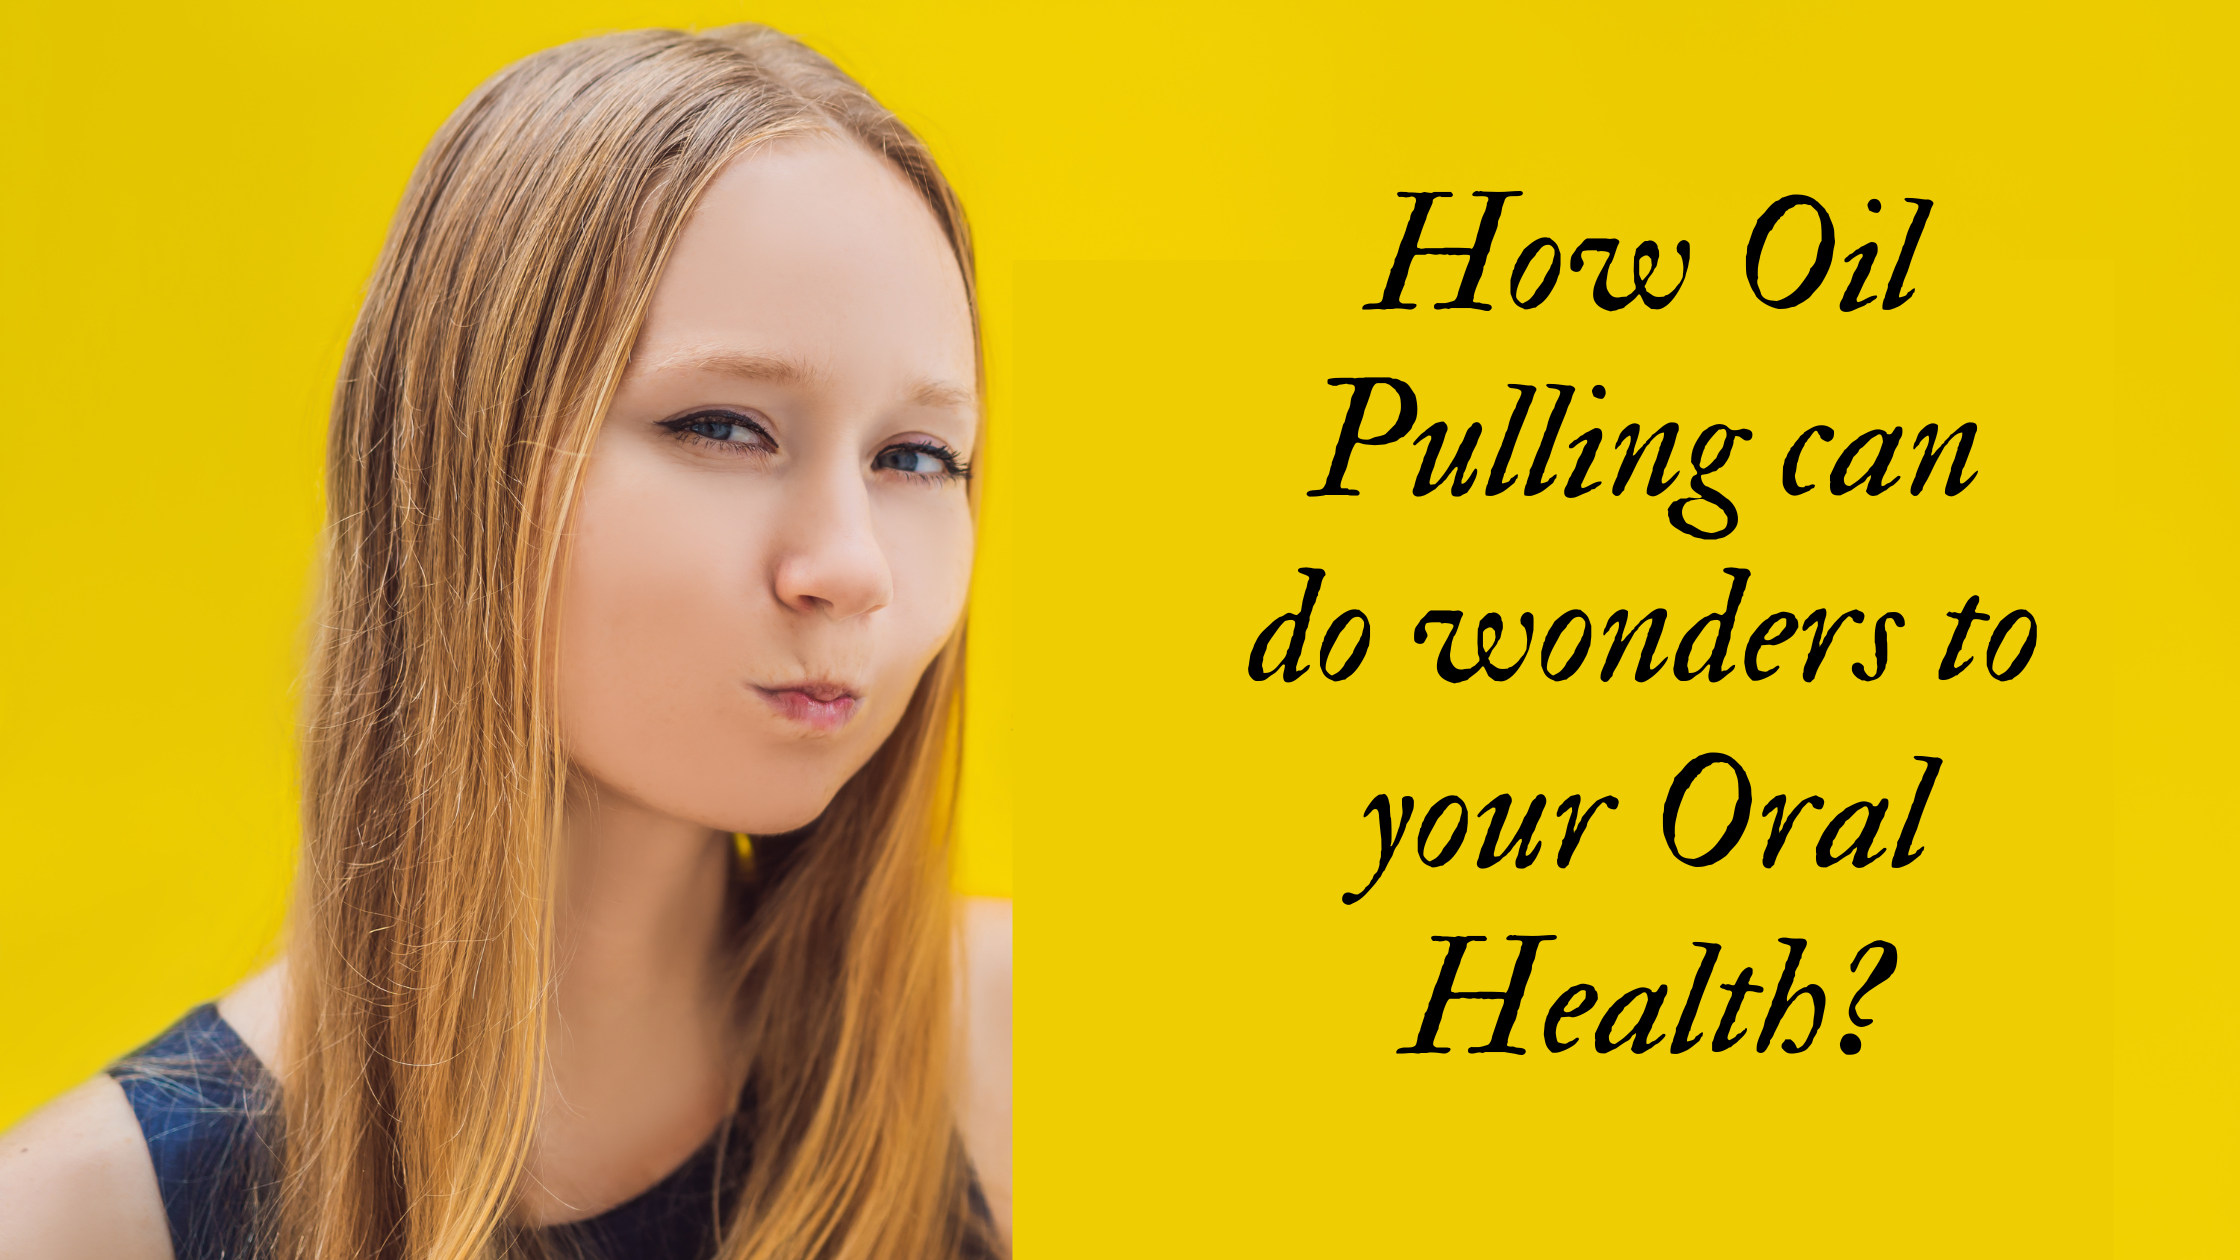 How Oil Pulling can do wonders to your Oral Health